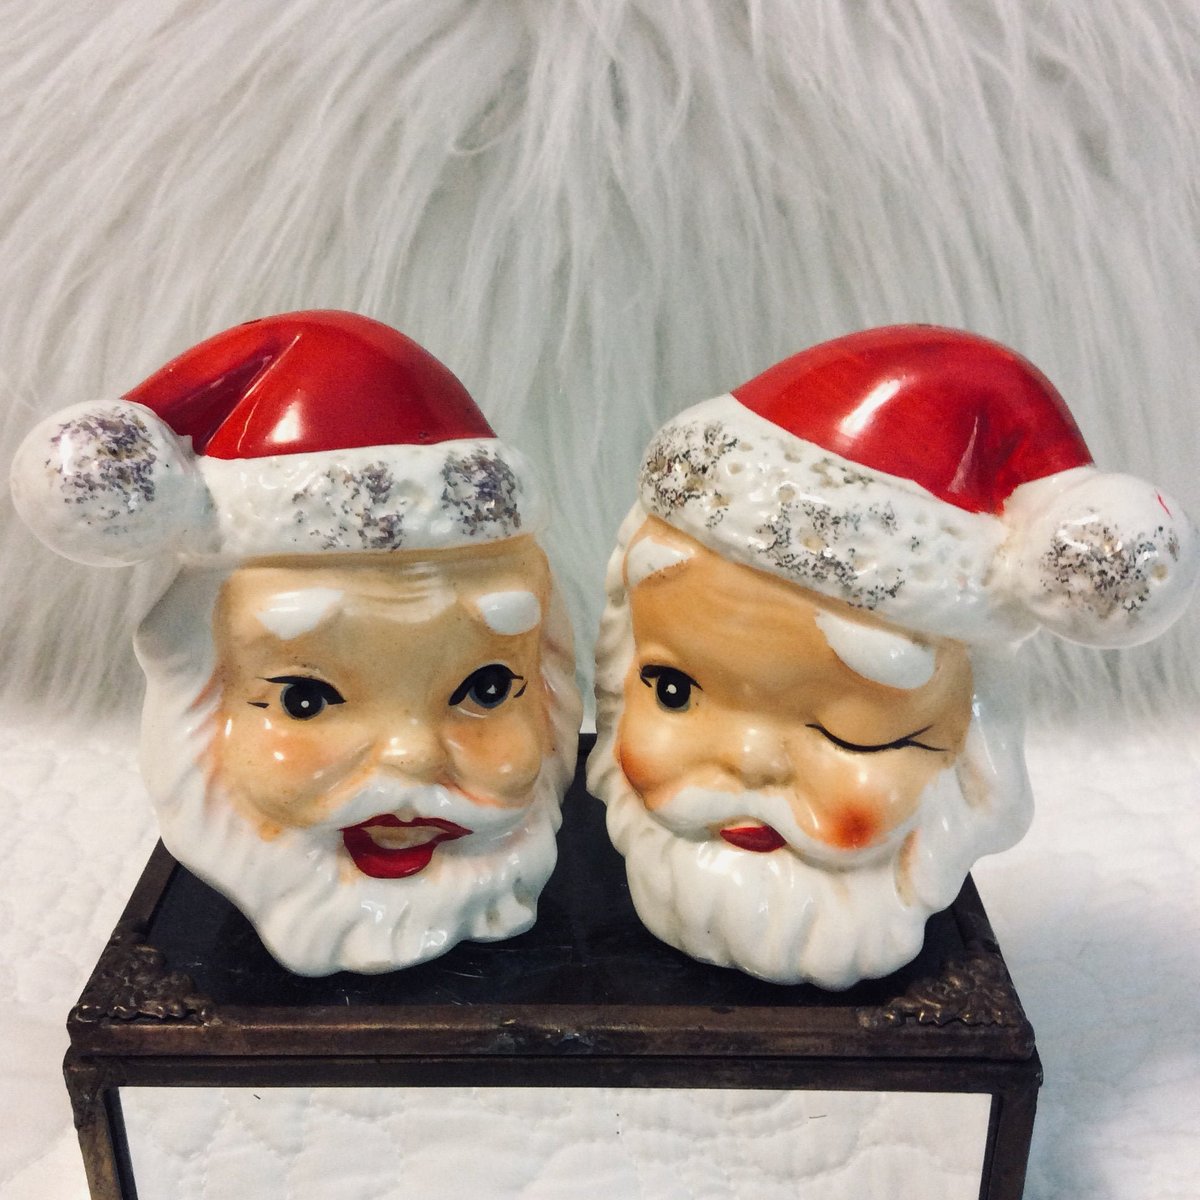 Excited to share the latest addition to my #etsy shop: Vintage Winking Santa Salt and Pepper Shakers Figurines Made in Japan 1960s etsy.me/3fdbLkw #red #christmas #white #ceramic #vintage #kitsch #santa #figurine #salt #vintagechristmas